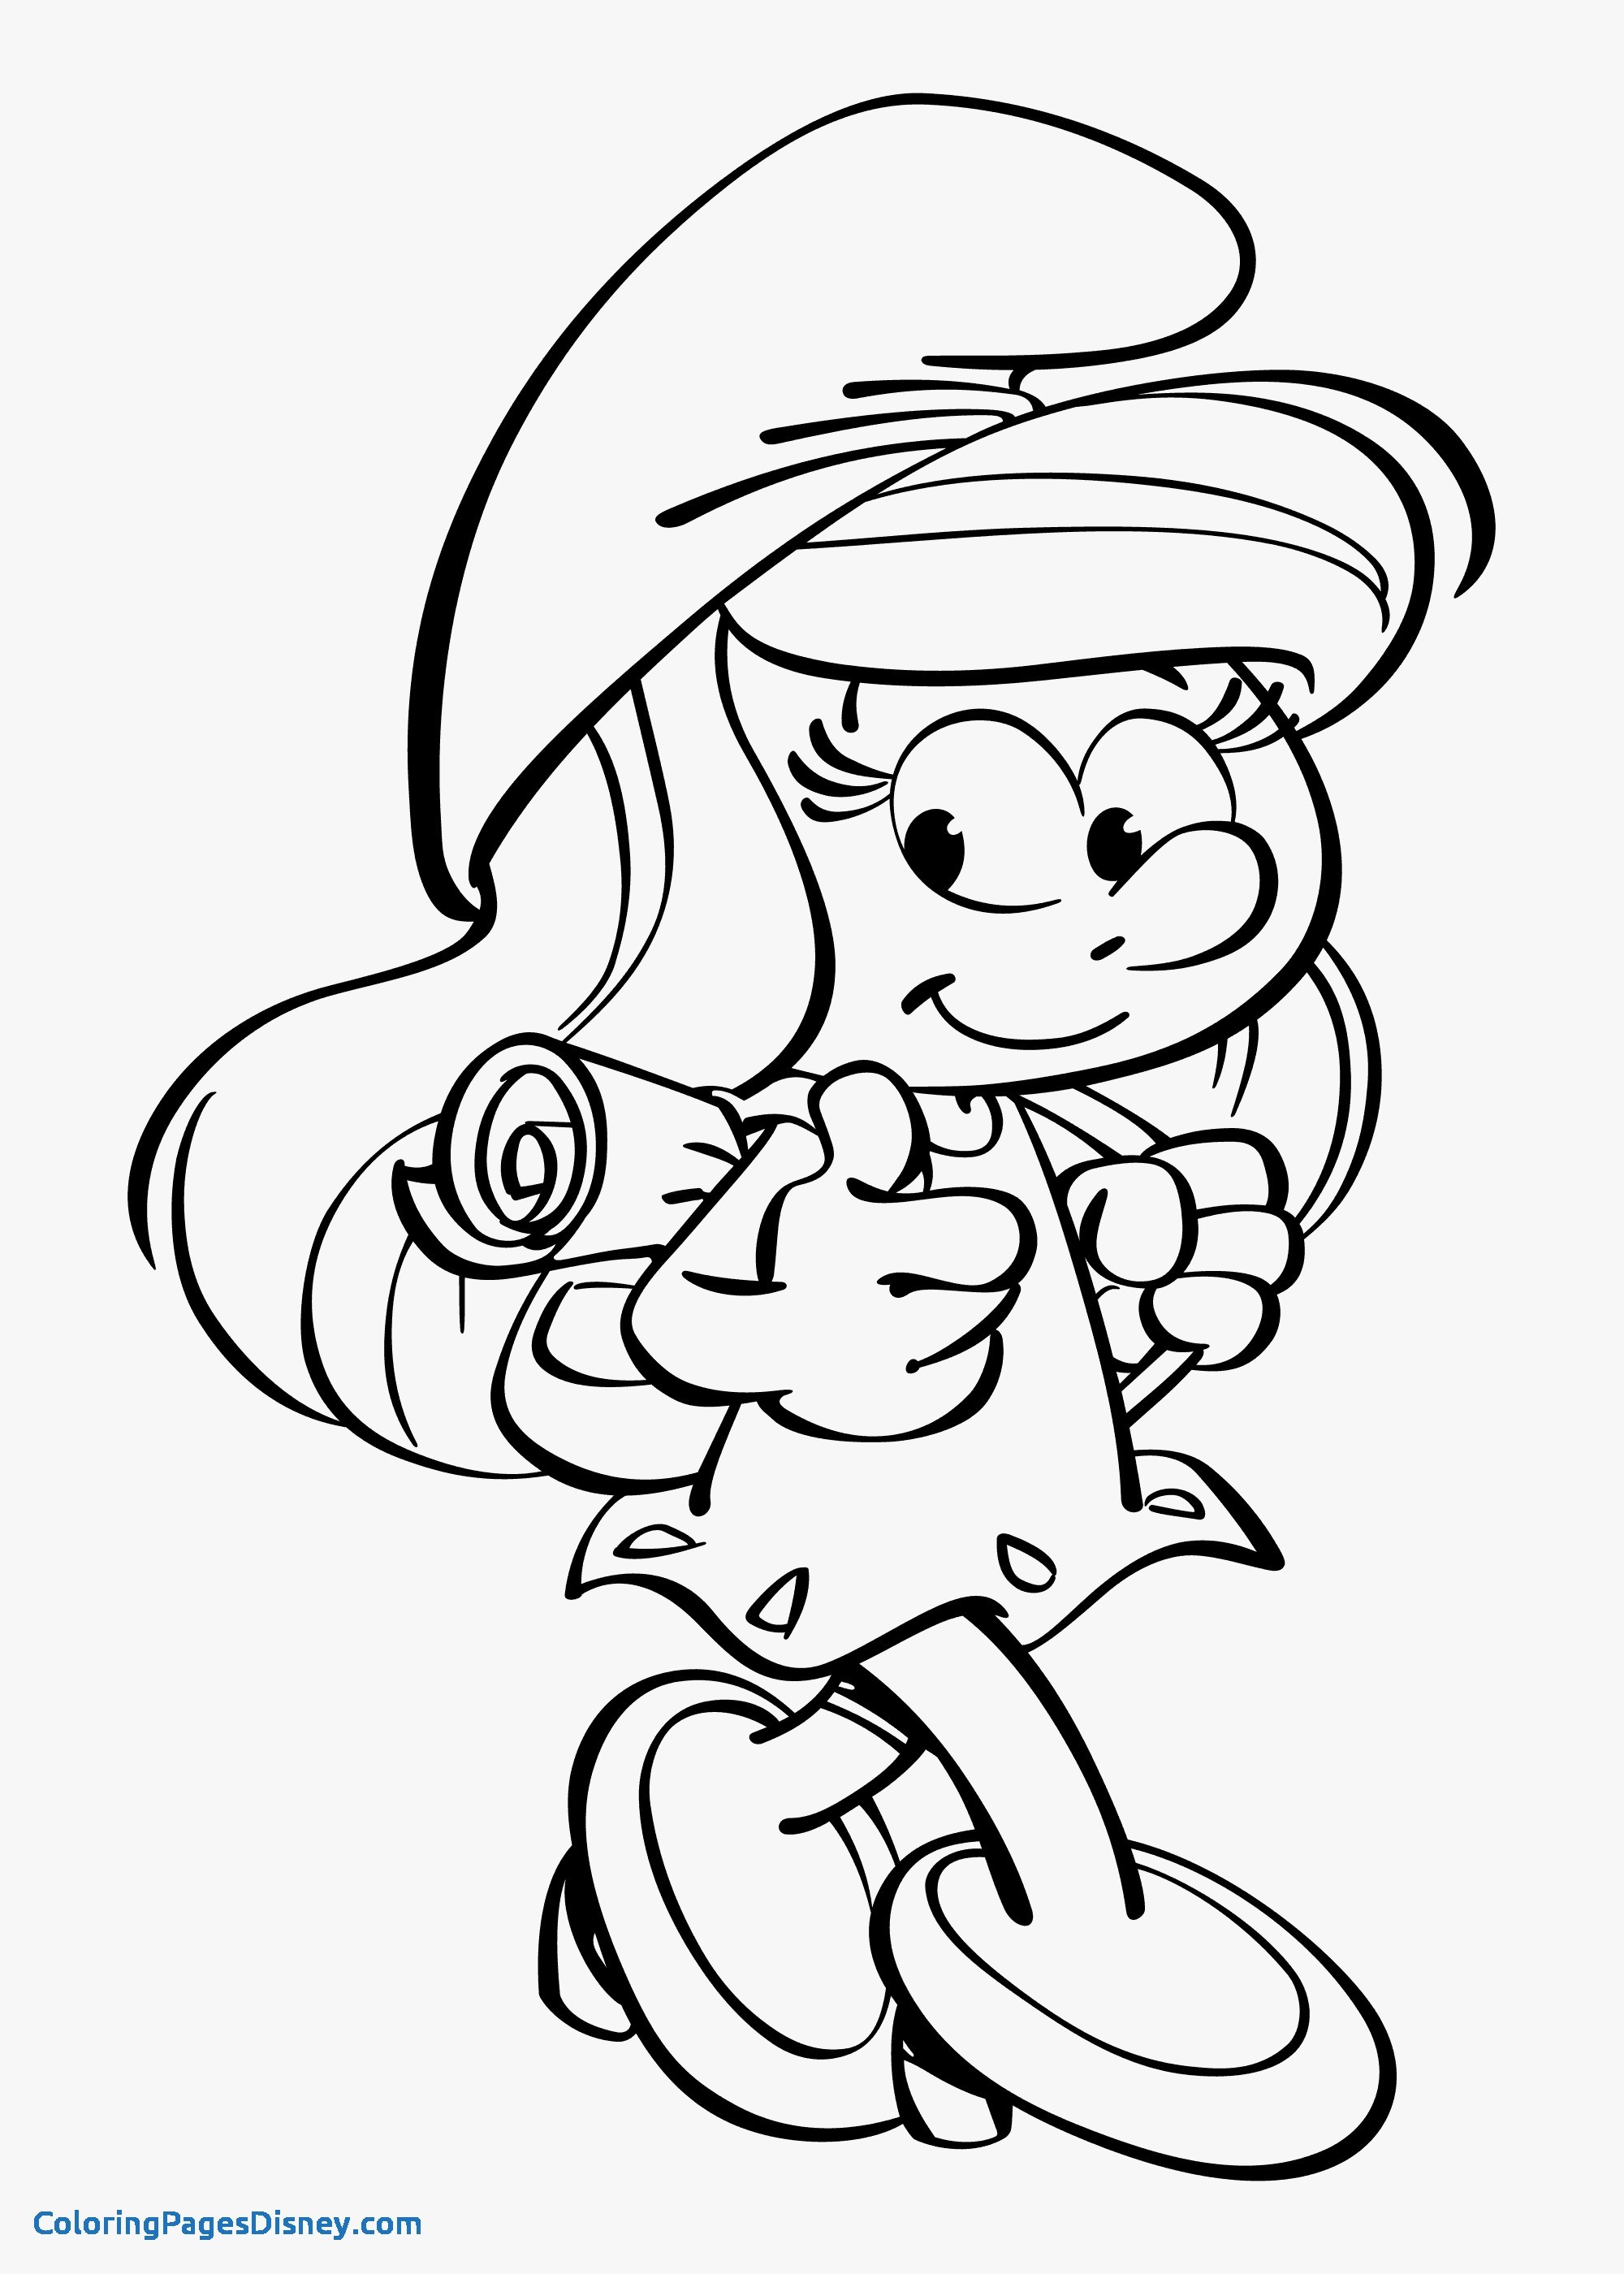 Smurfs Coloring Pages Her Hos Undergrunnen